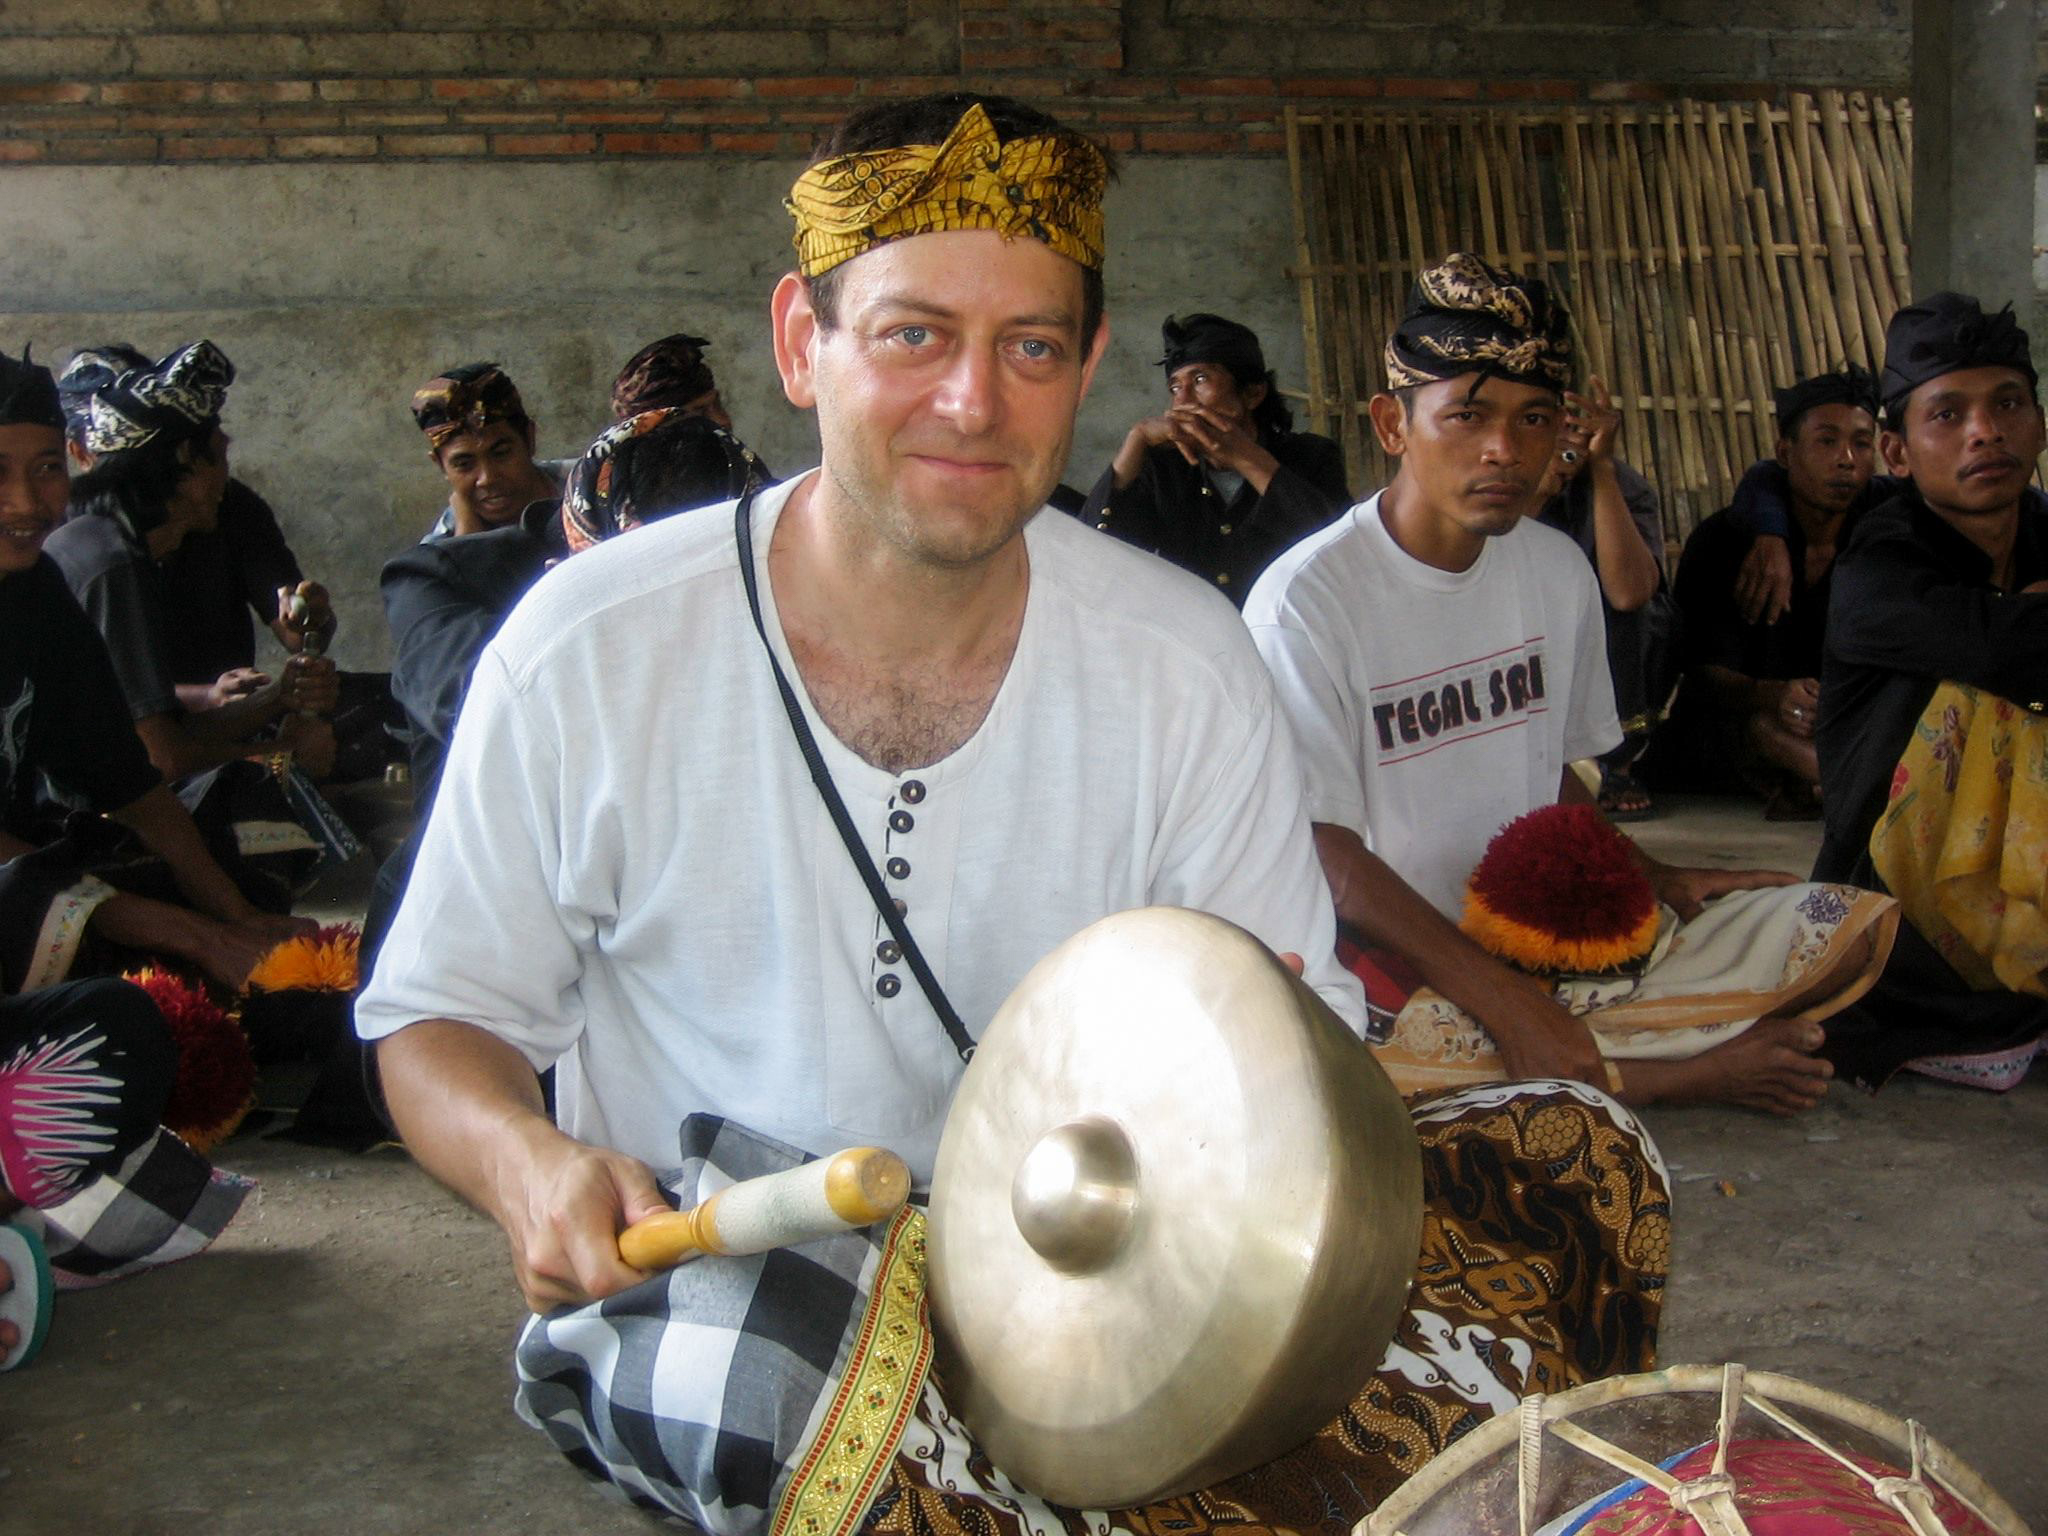 Joining the local gamelan orchestra, Bali, Indonesia